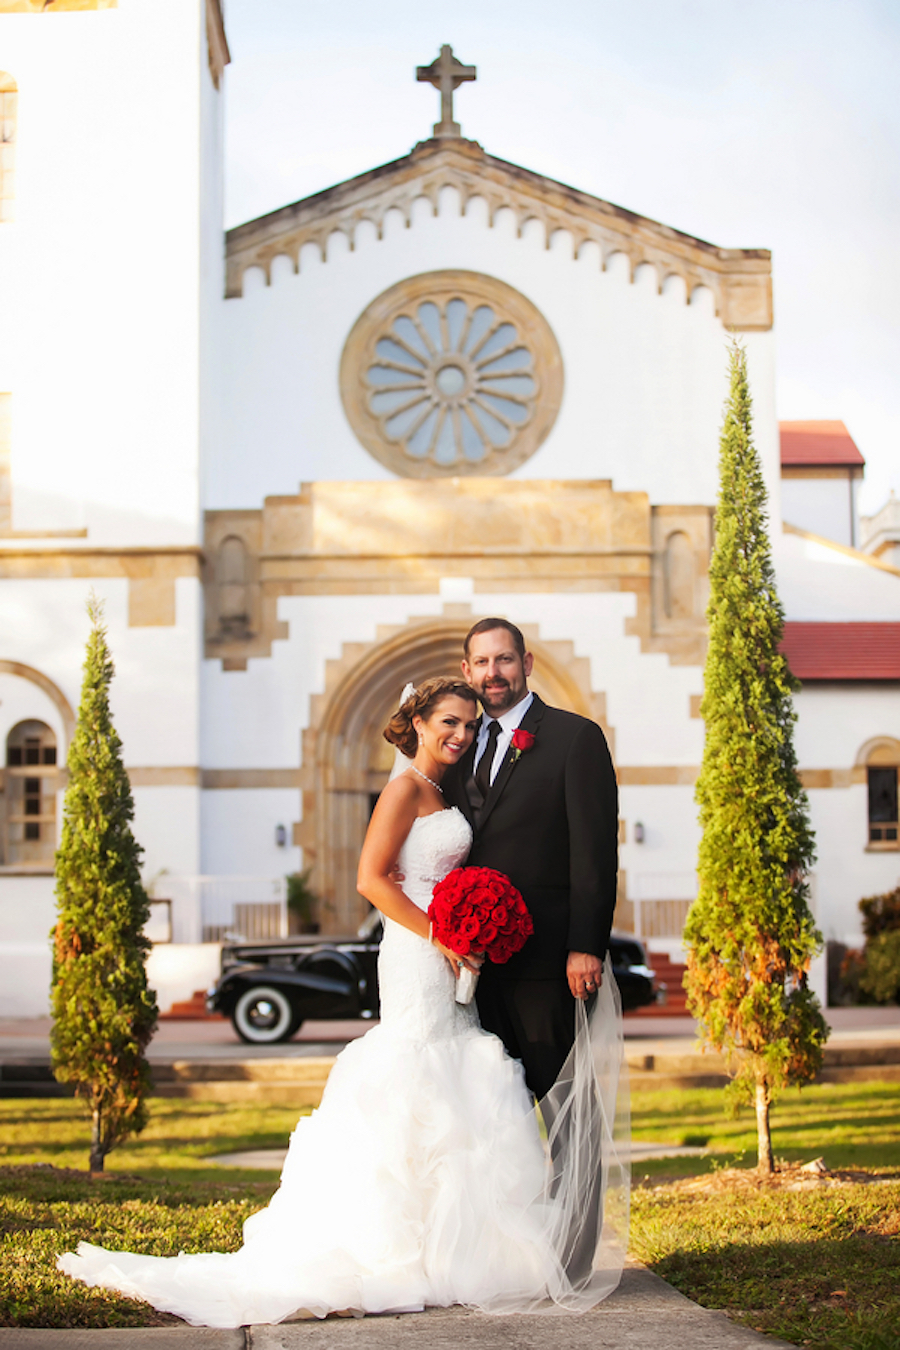 Bride and Groom Wedding Portrait at Tampa Bay Wedding Venue St. Leo Abbey Church| Photo by Tampa Bay Wedding Photographer Limelight Photography